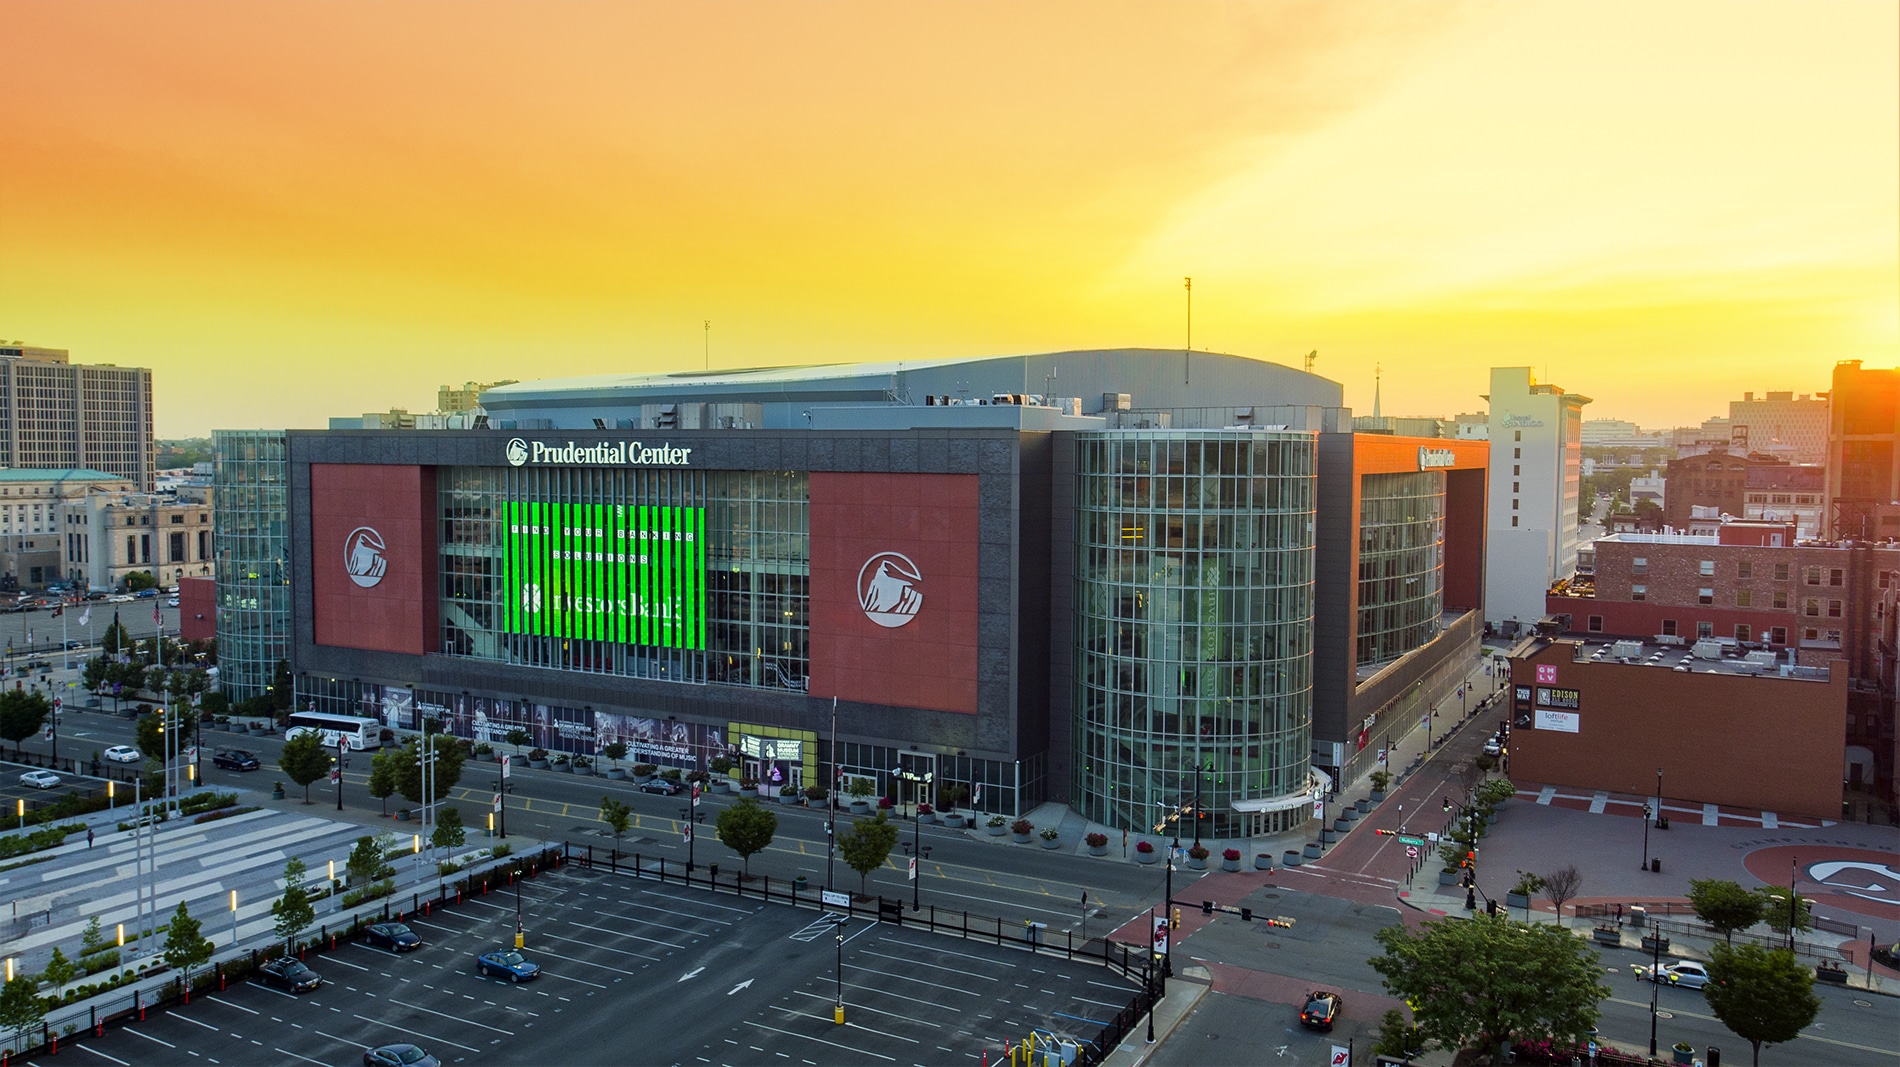 Drone Photograph taken at sunset of the Prudential Center in Newark New Jersey